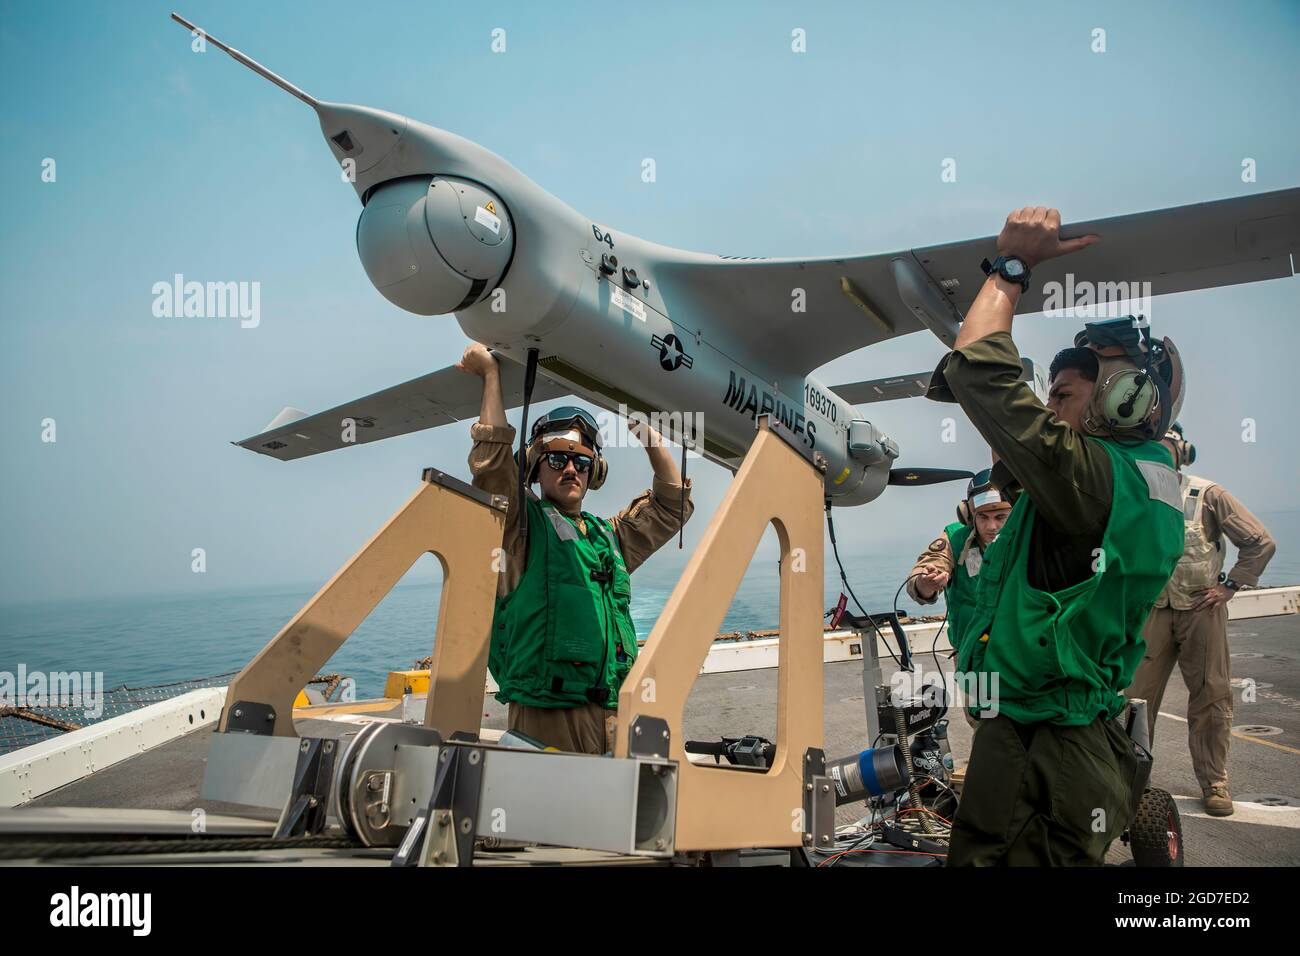 190731-M-QP663-1019 ARABIAN GULF (July 31, 2019) Marines with Marine Medium Tiltrotor Squadron (VMM) 163 (Reinforced), 11th Marine Expeditionary Unit (MEU) lift an RQ-21A Blackjack unmanned aerial system (UAS) onto a launcher before flight operations aboard the amphibious transport dock ship USS John P. Murtha (LPD 26). The Boxer Amphibious Ready Group and the 11th MEU are deployed to the U.S. 5th Fleet area of operations in support of naval operations to ensure maritime stability and security in the Central Region, connecting the Mediterranean and the Pacific through the western Indian Ocean Stock Photo